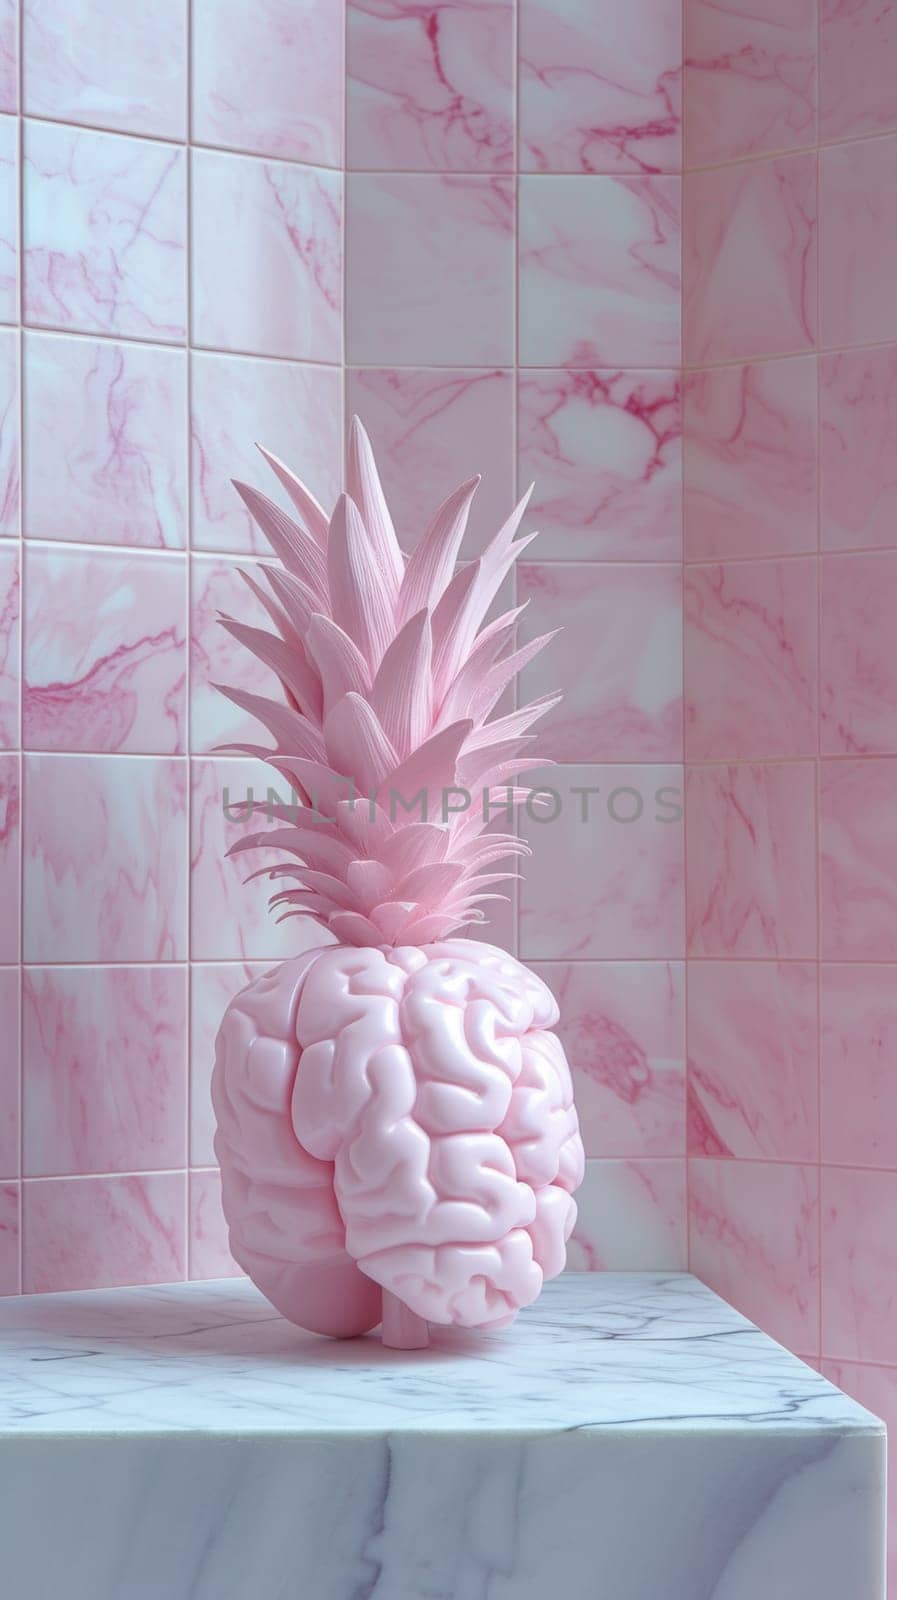 A pink pineapple with a brain on top of it sitting in front of some tiled walls